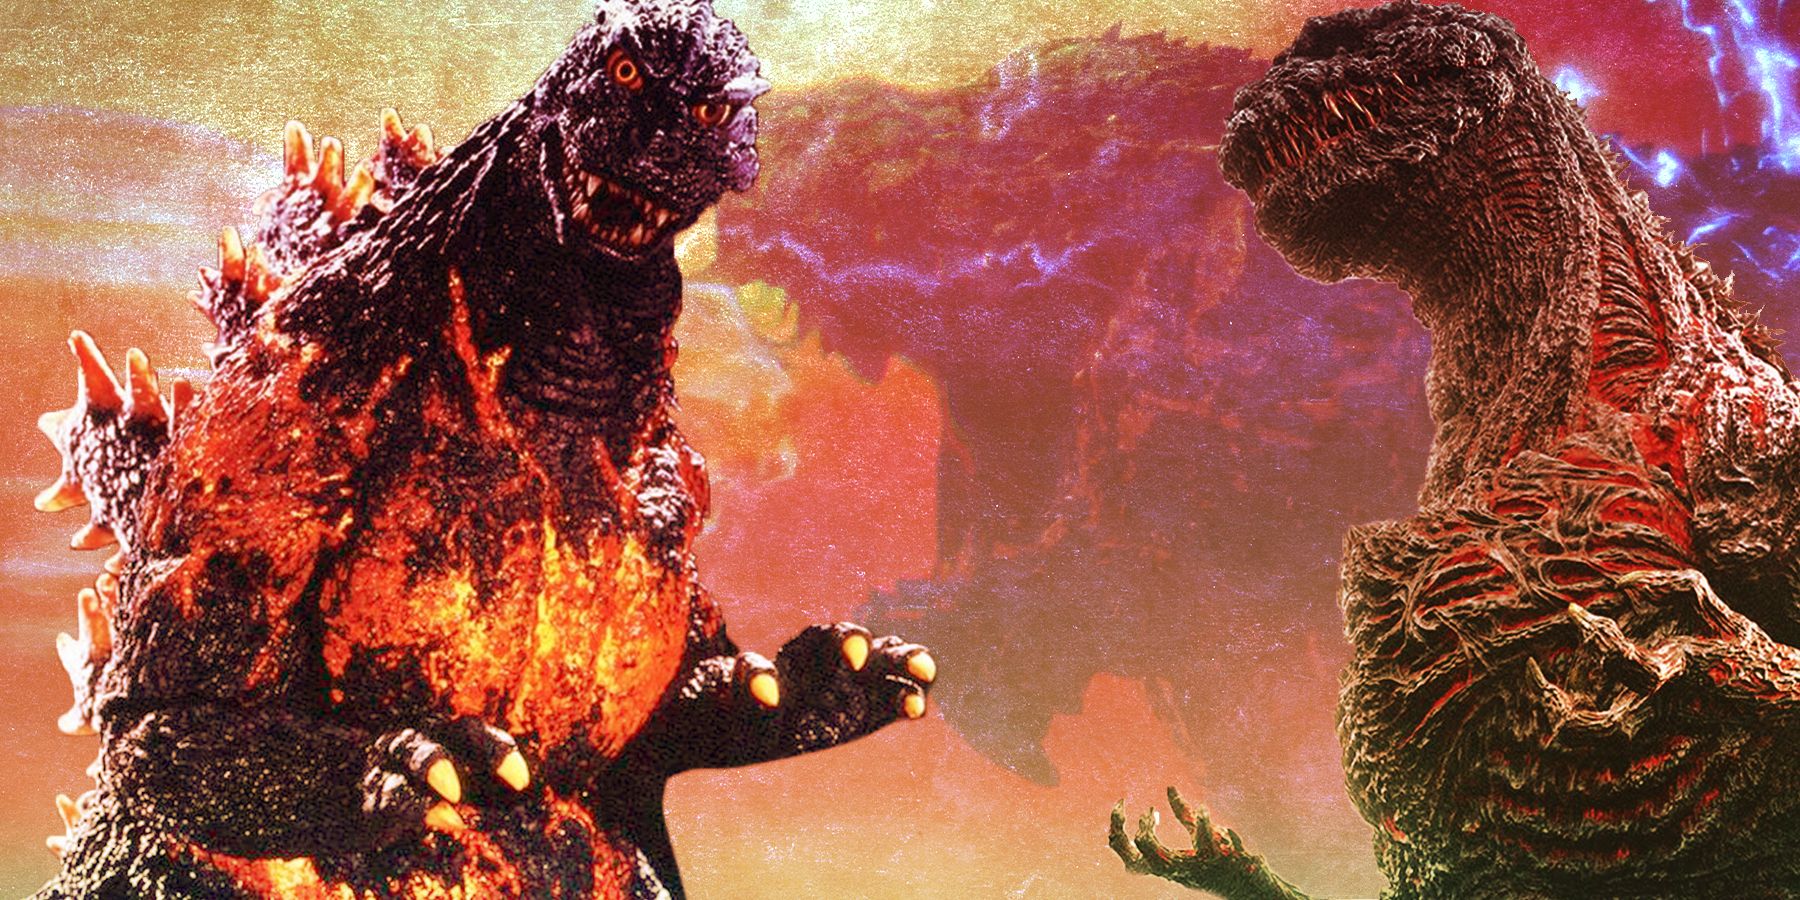 Godzilla – the most famous monster in the world